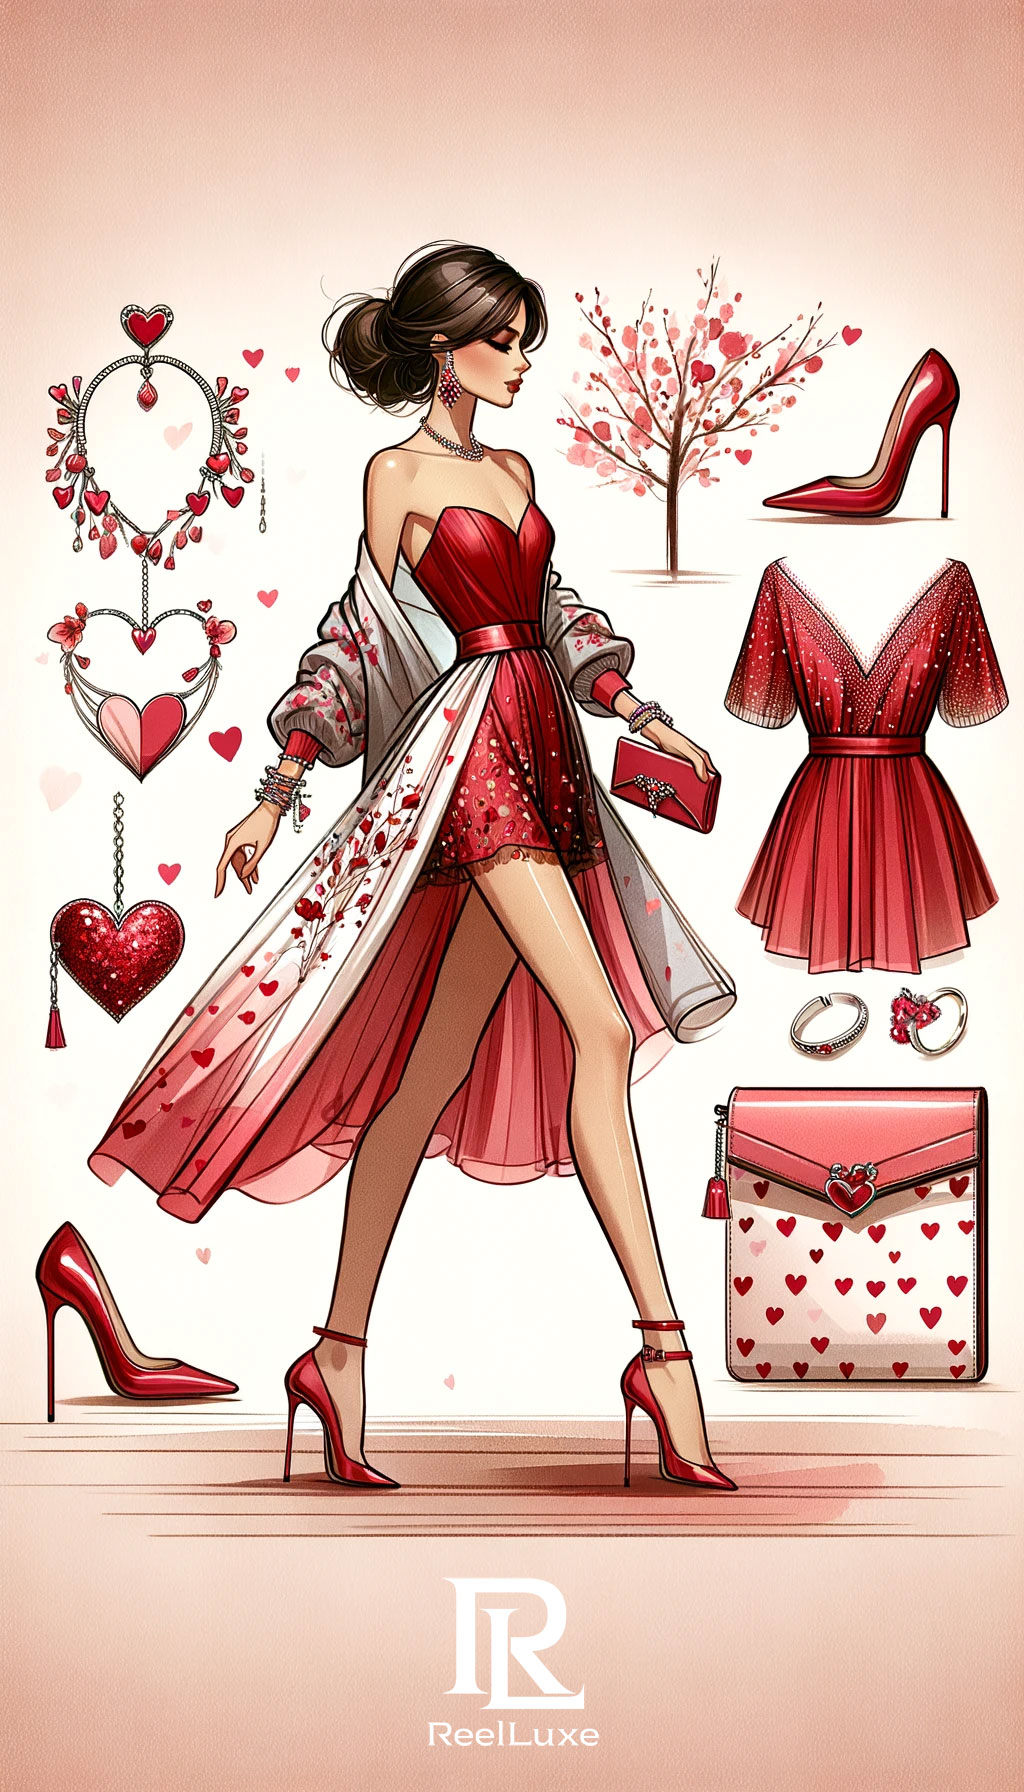 Romance in the Air - Valentine's Day - Beauty and Fashion - 12